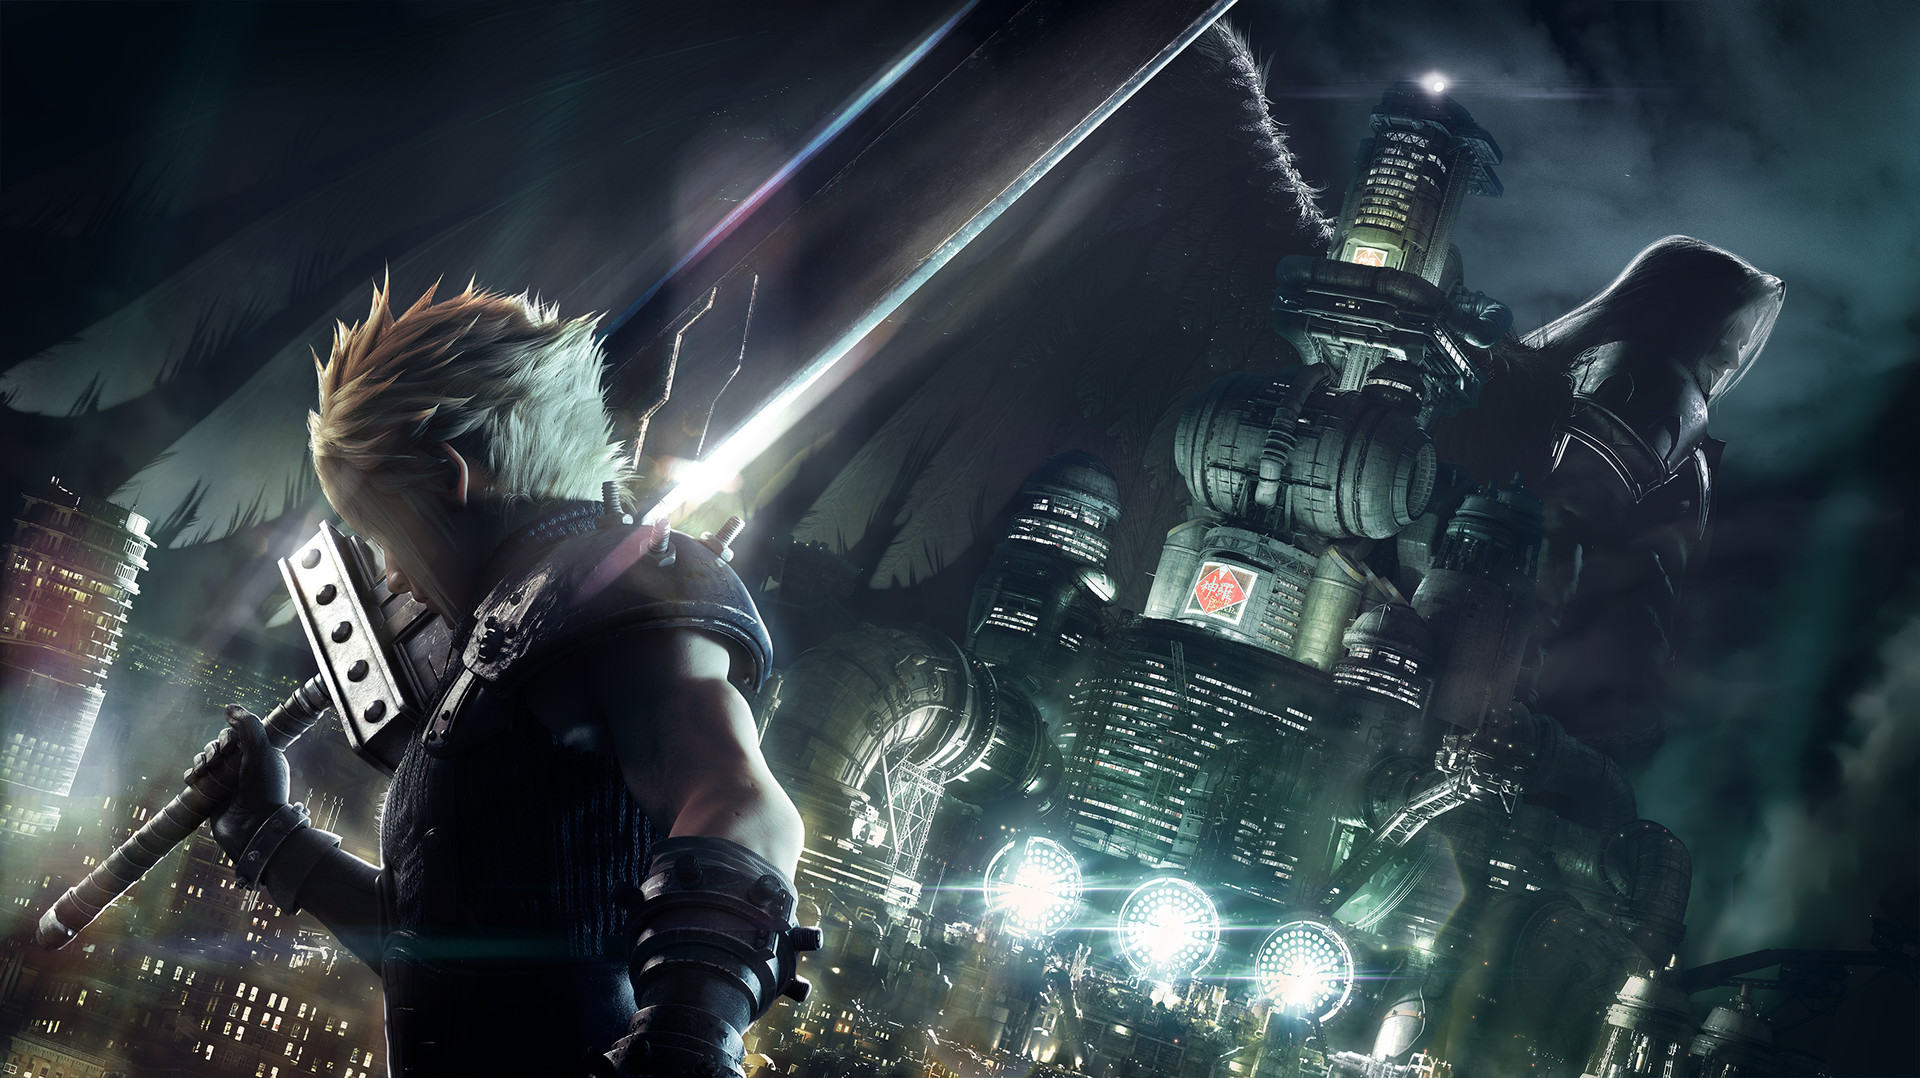 Final Fantasy 7 Remake Part 2 Is In Active Development Amid The Pandemic